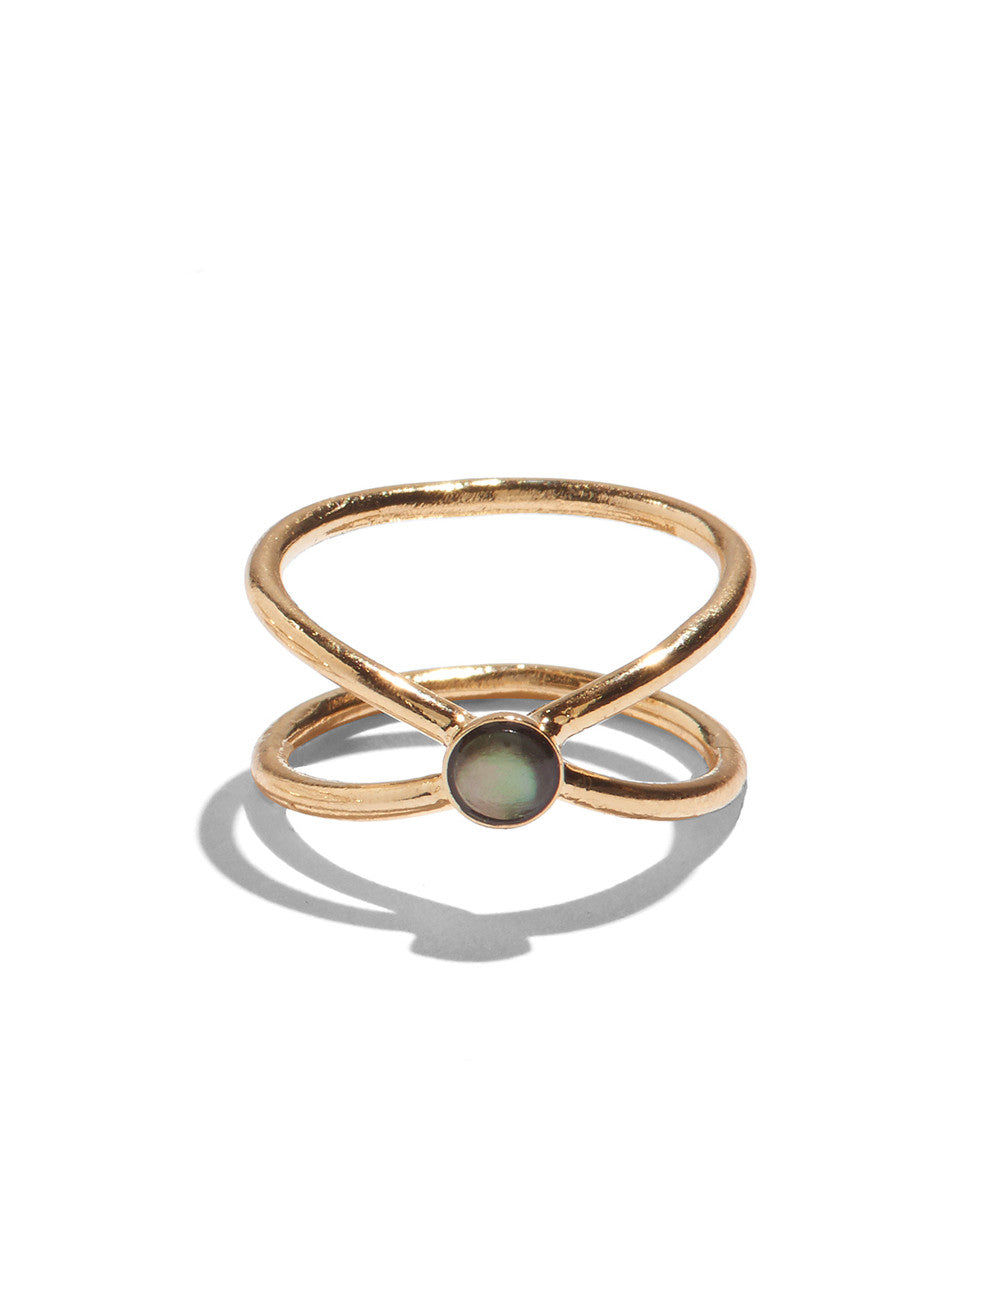 Aurora Ring in Gold Vermeil with Black Mother of Pearl – Lady Grey